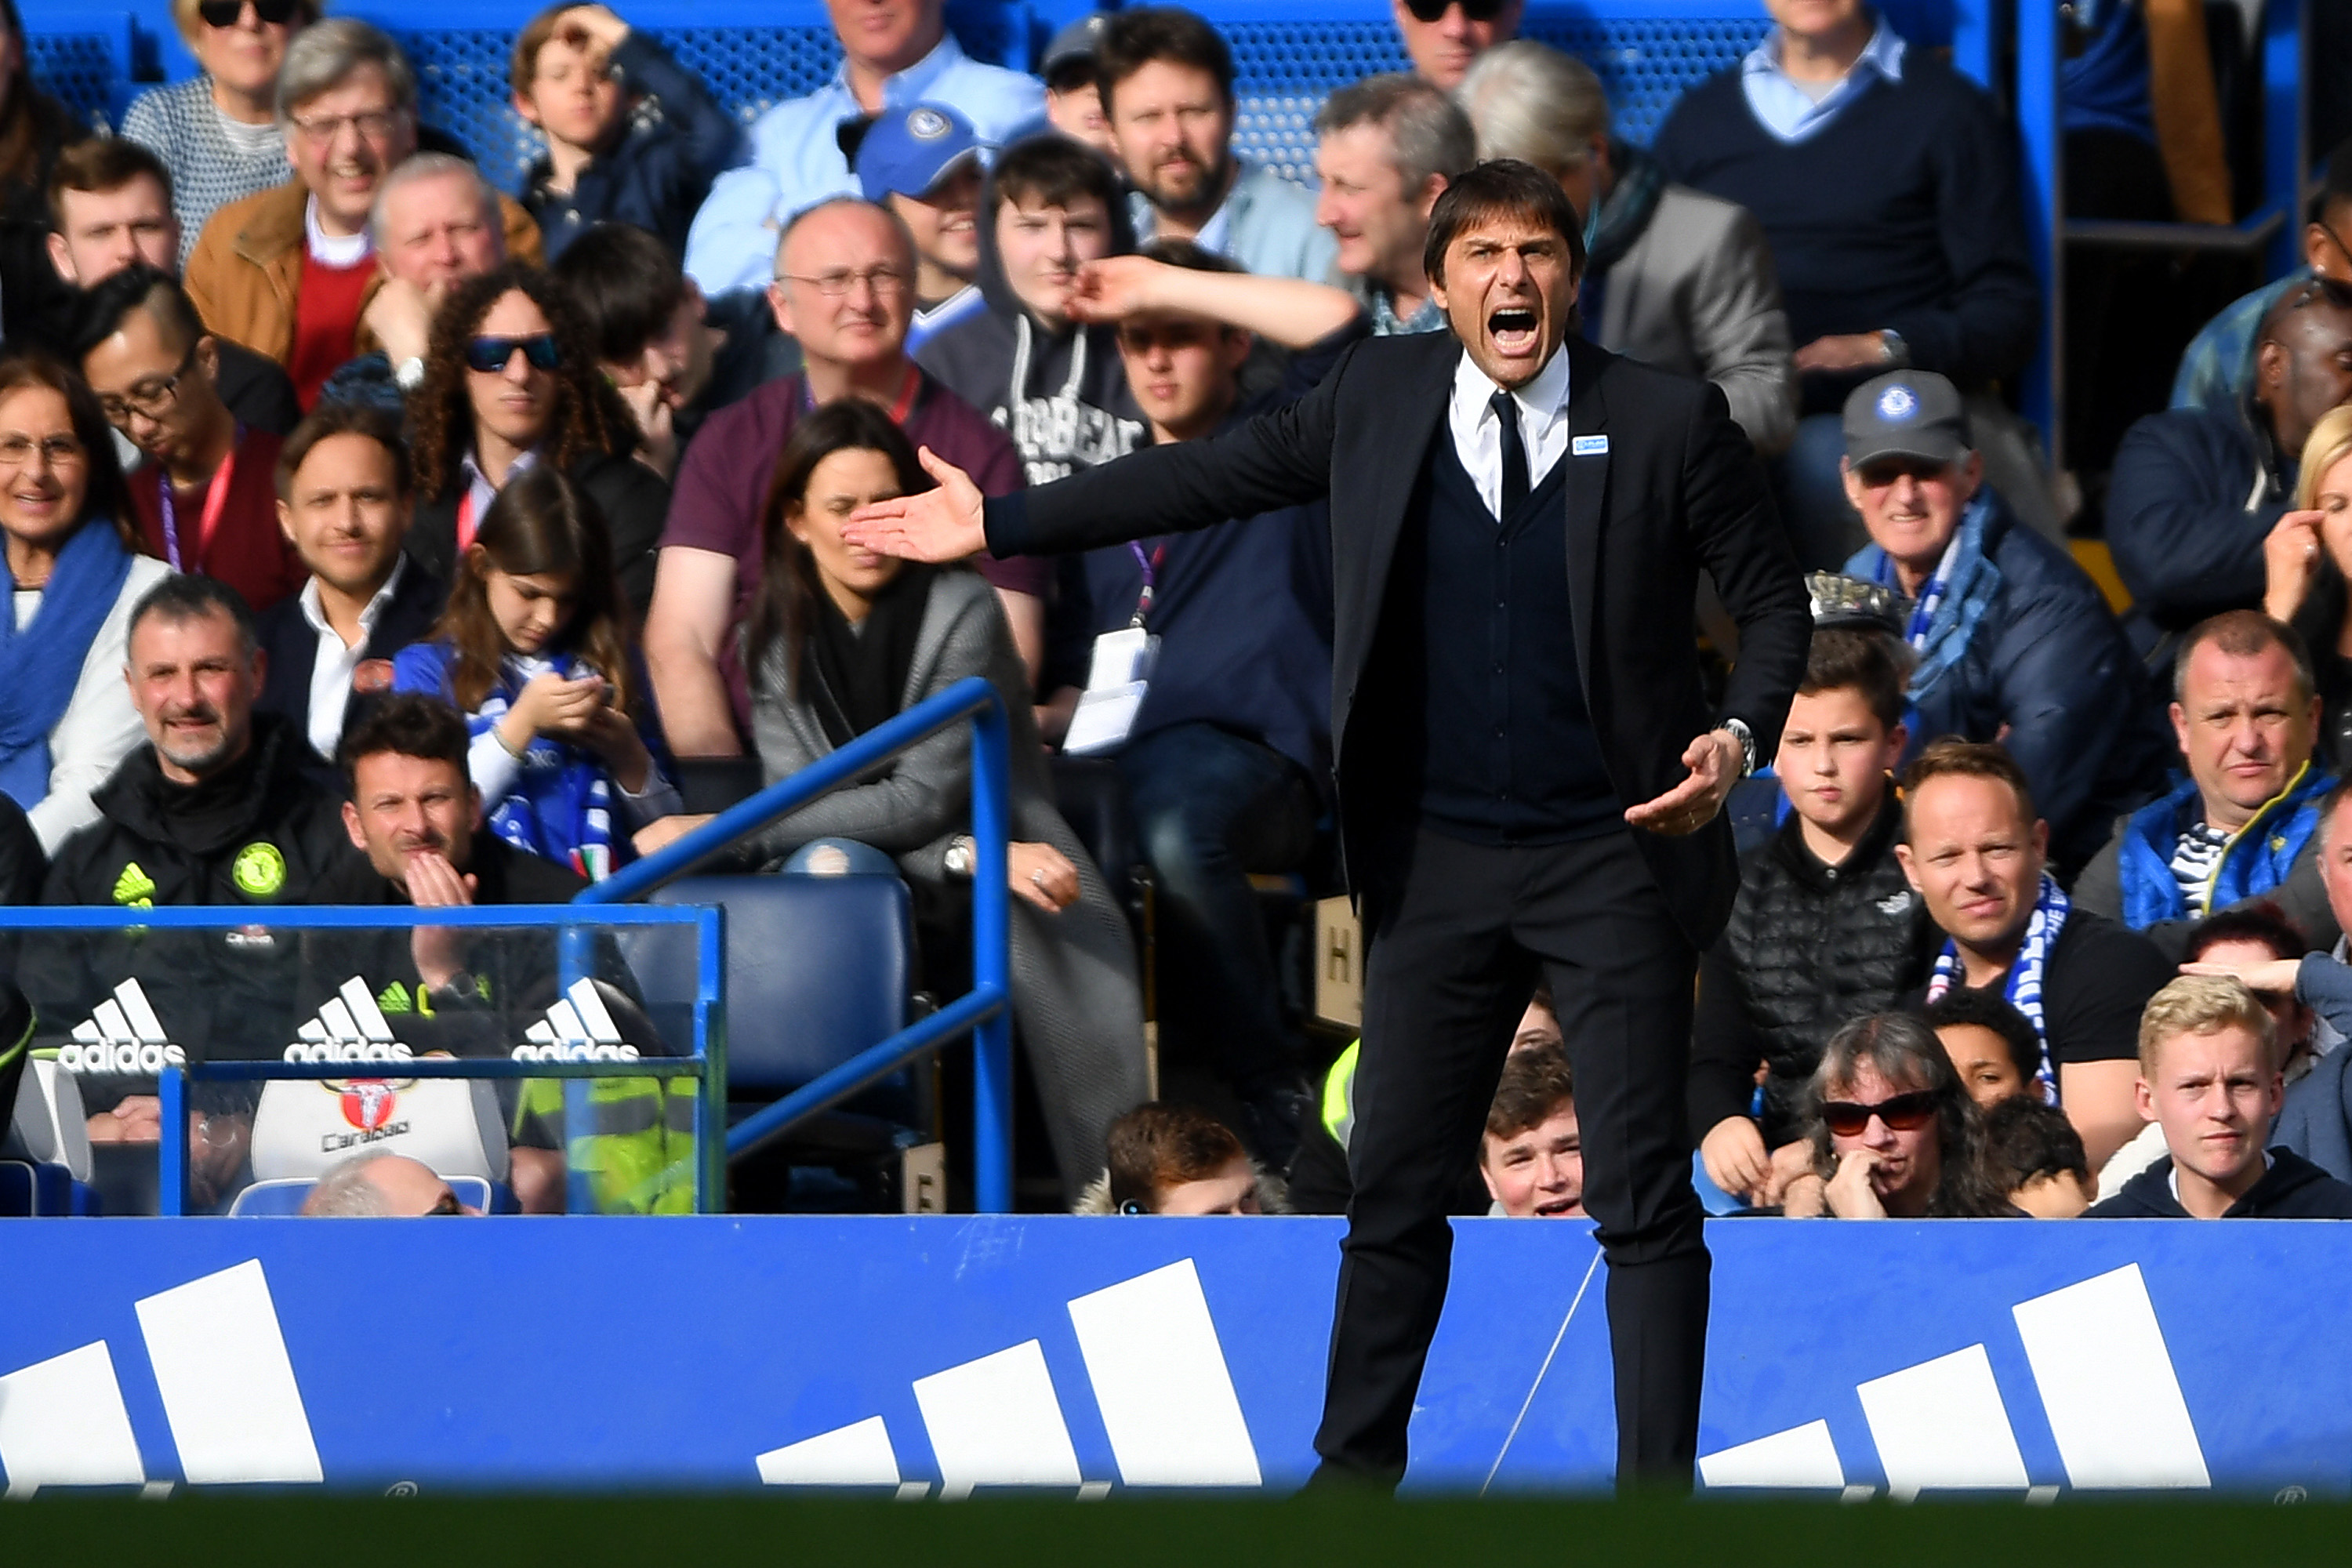 LONDON, ENGLAND - APRIL 01: Antonio Conte, Manager of Chelsea reacts during the Premier League match between Chelsea and Crystal Palace at Stamford Bridge on April 1, 2017 in London, England.  (Photo by Mike Hewitt/Getty Images)